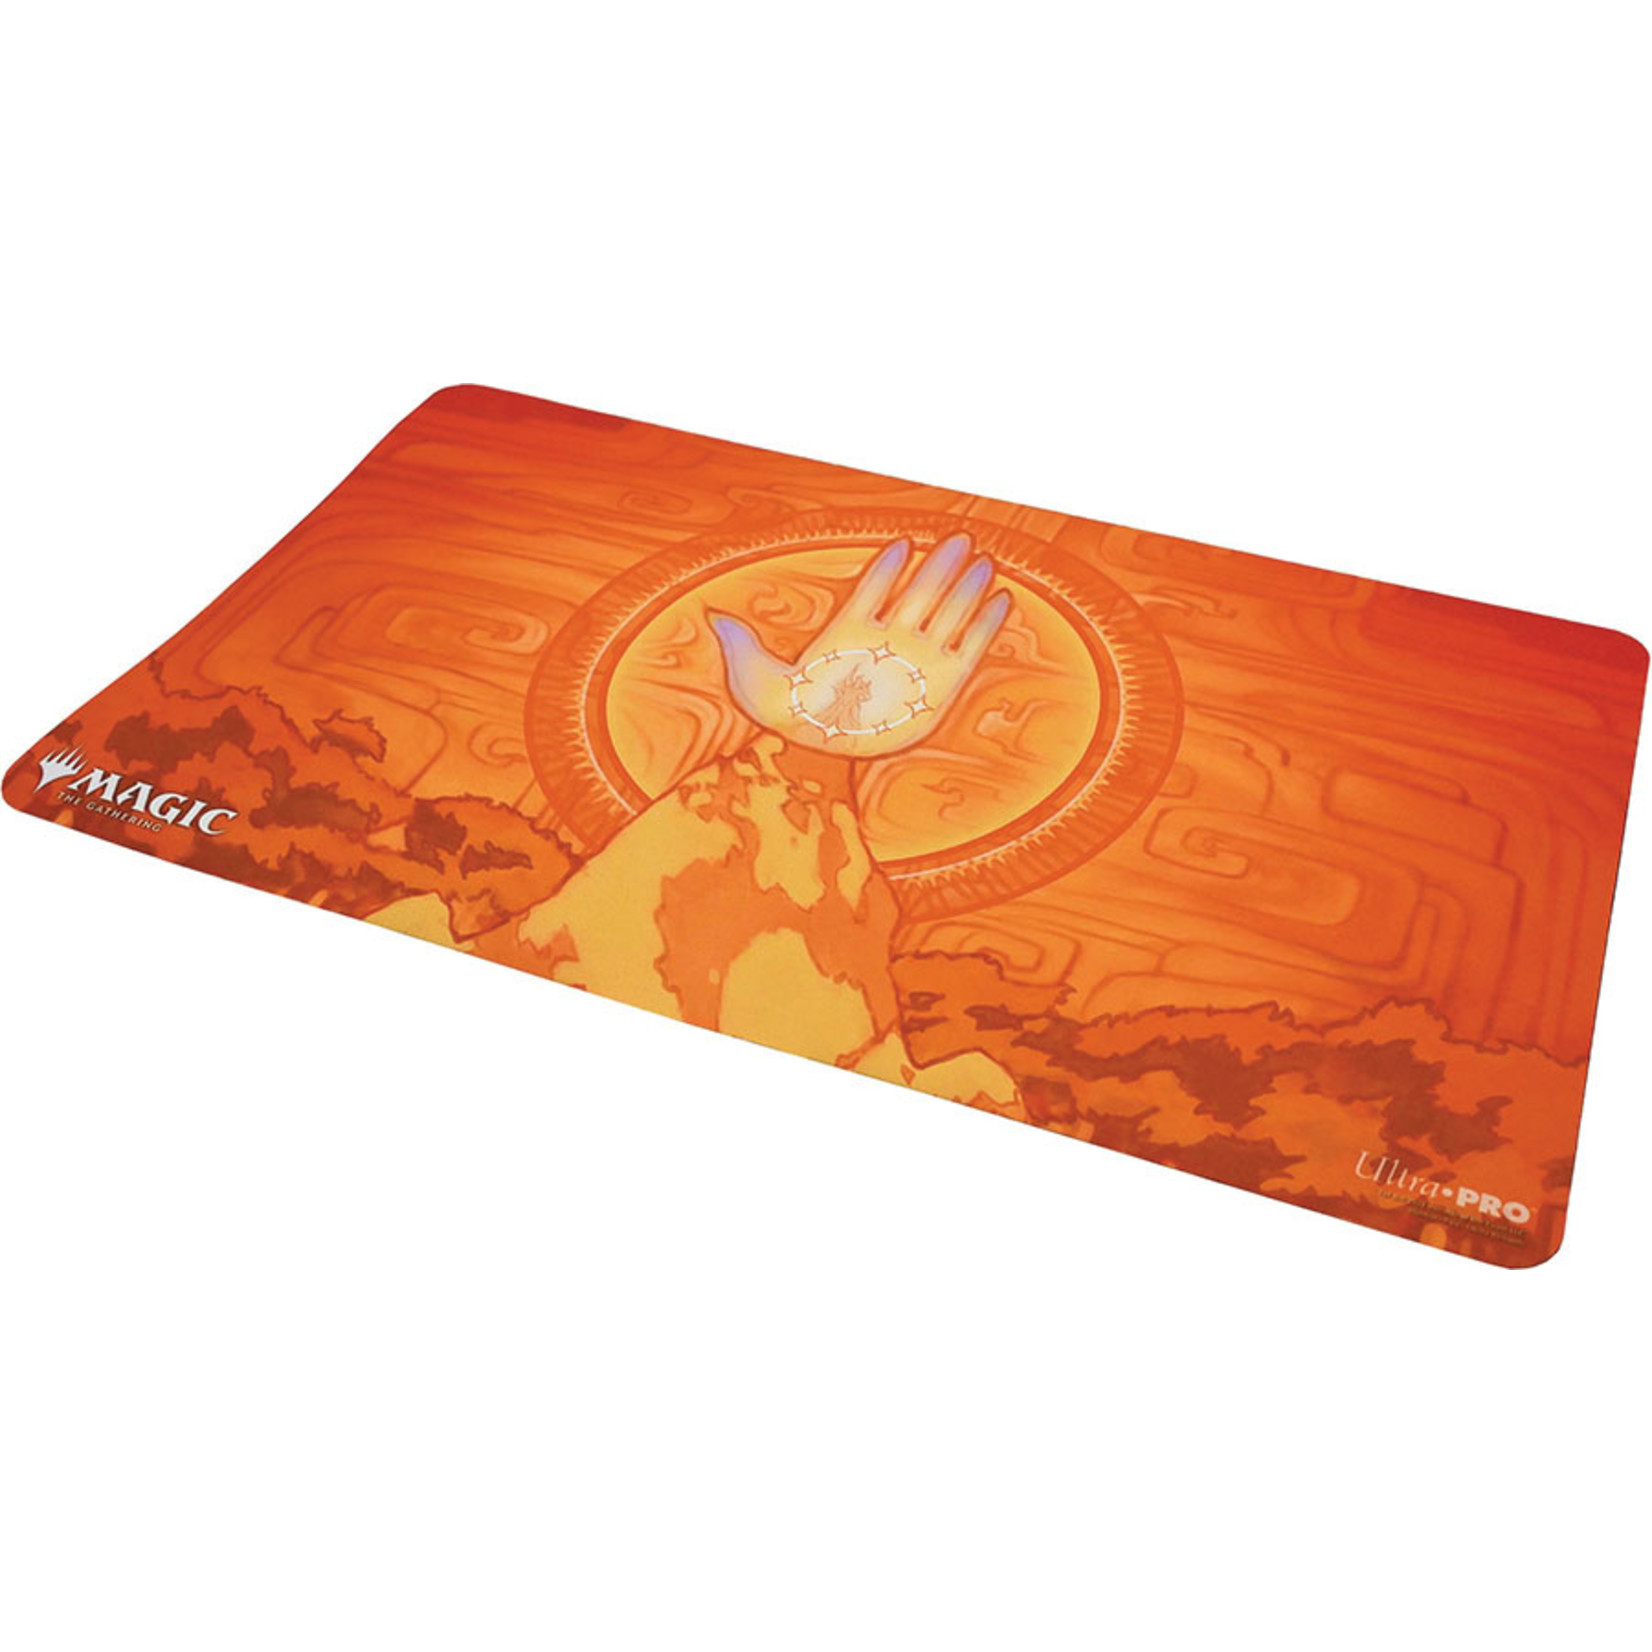 Ultra Pro MTG Mystical Archive Counterspell Playmat